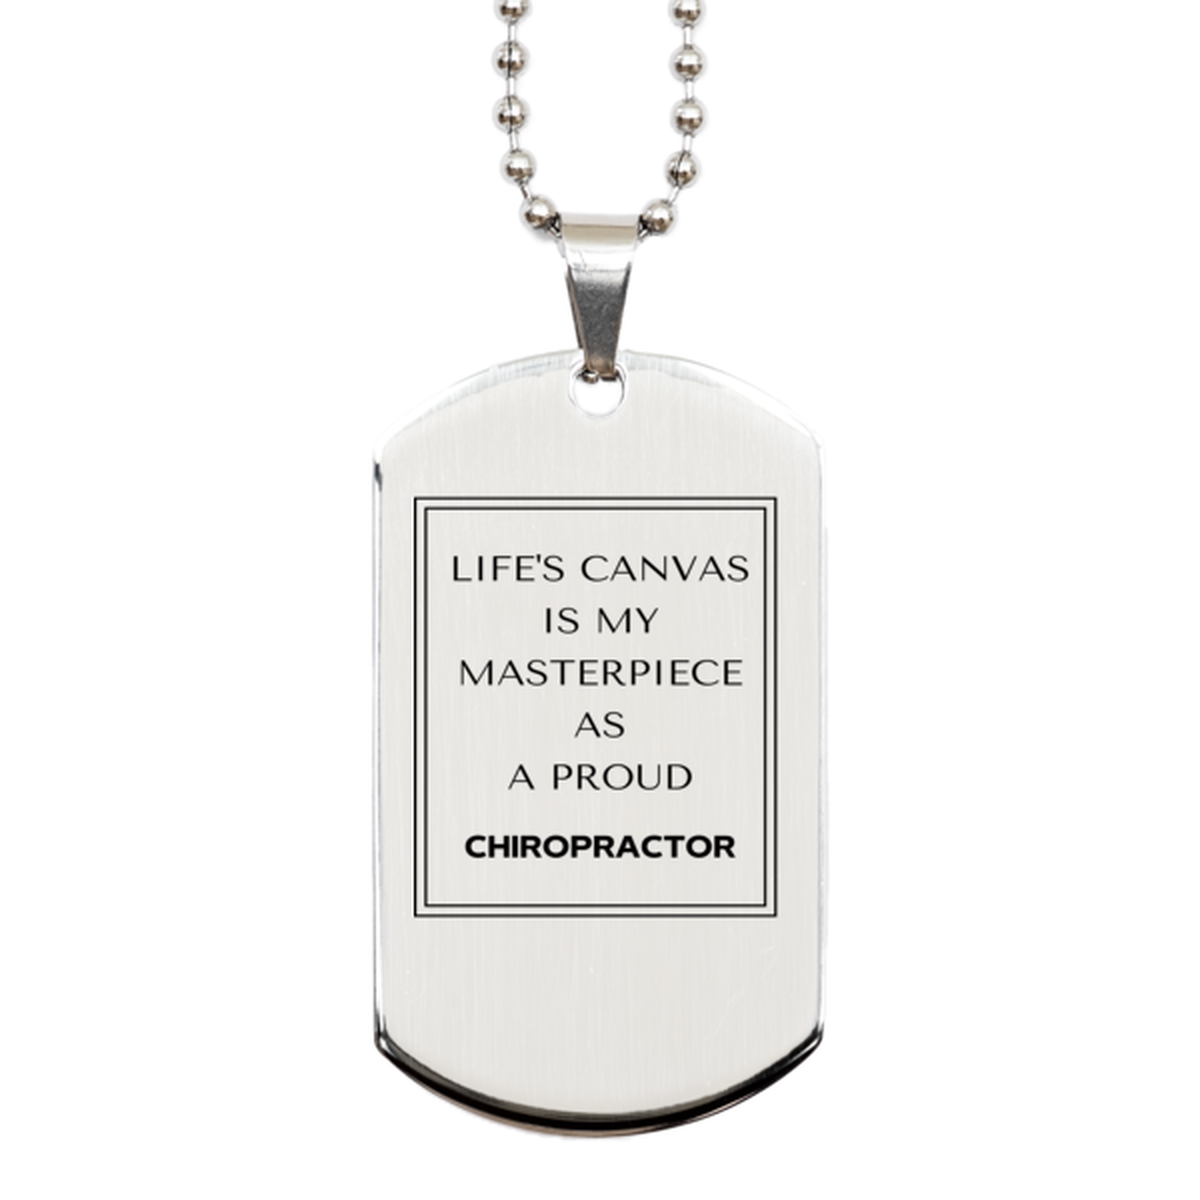 Proud Chiropractor Gifts, Life's canvas is my masterpiece, Epic Birthday Christmas Unique Silver Dog Tag For Chiropractor, Coworkers, Men, Women, Friends